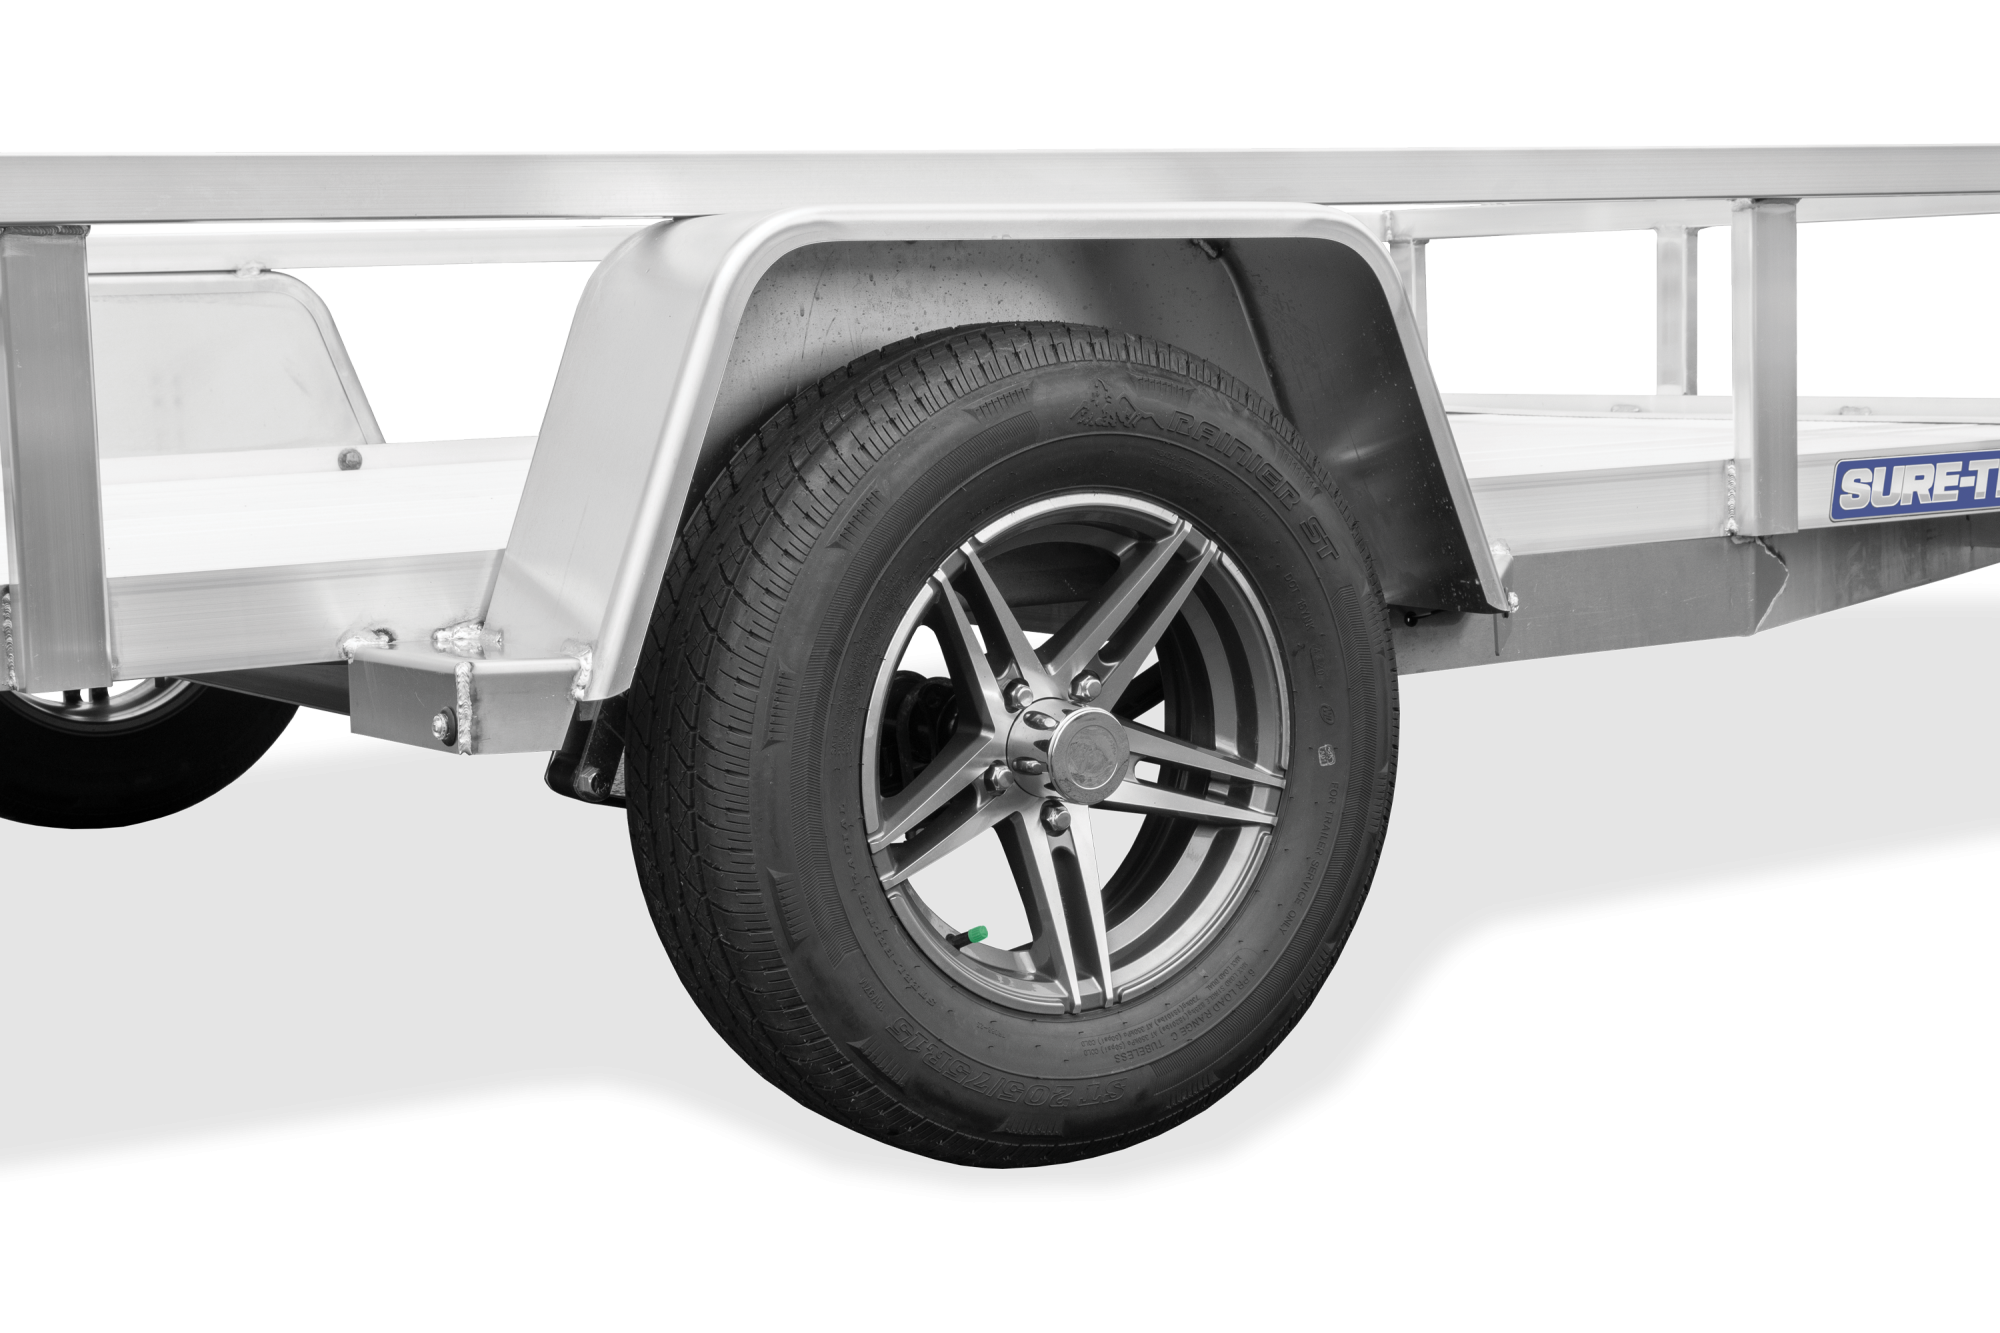 Sure-Trac | Aluminum Tube Top Utility | Image | Side view, tilted, Single Axle Aluminum Tube Top Utility, close-up of Tires